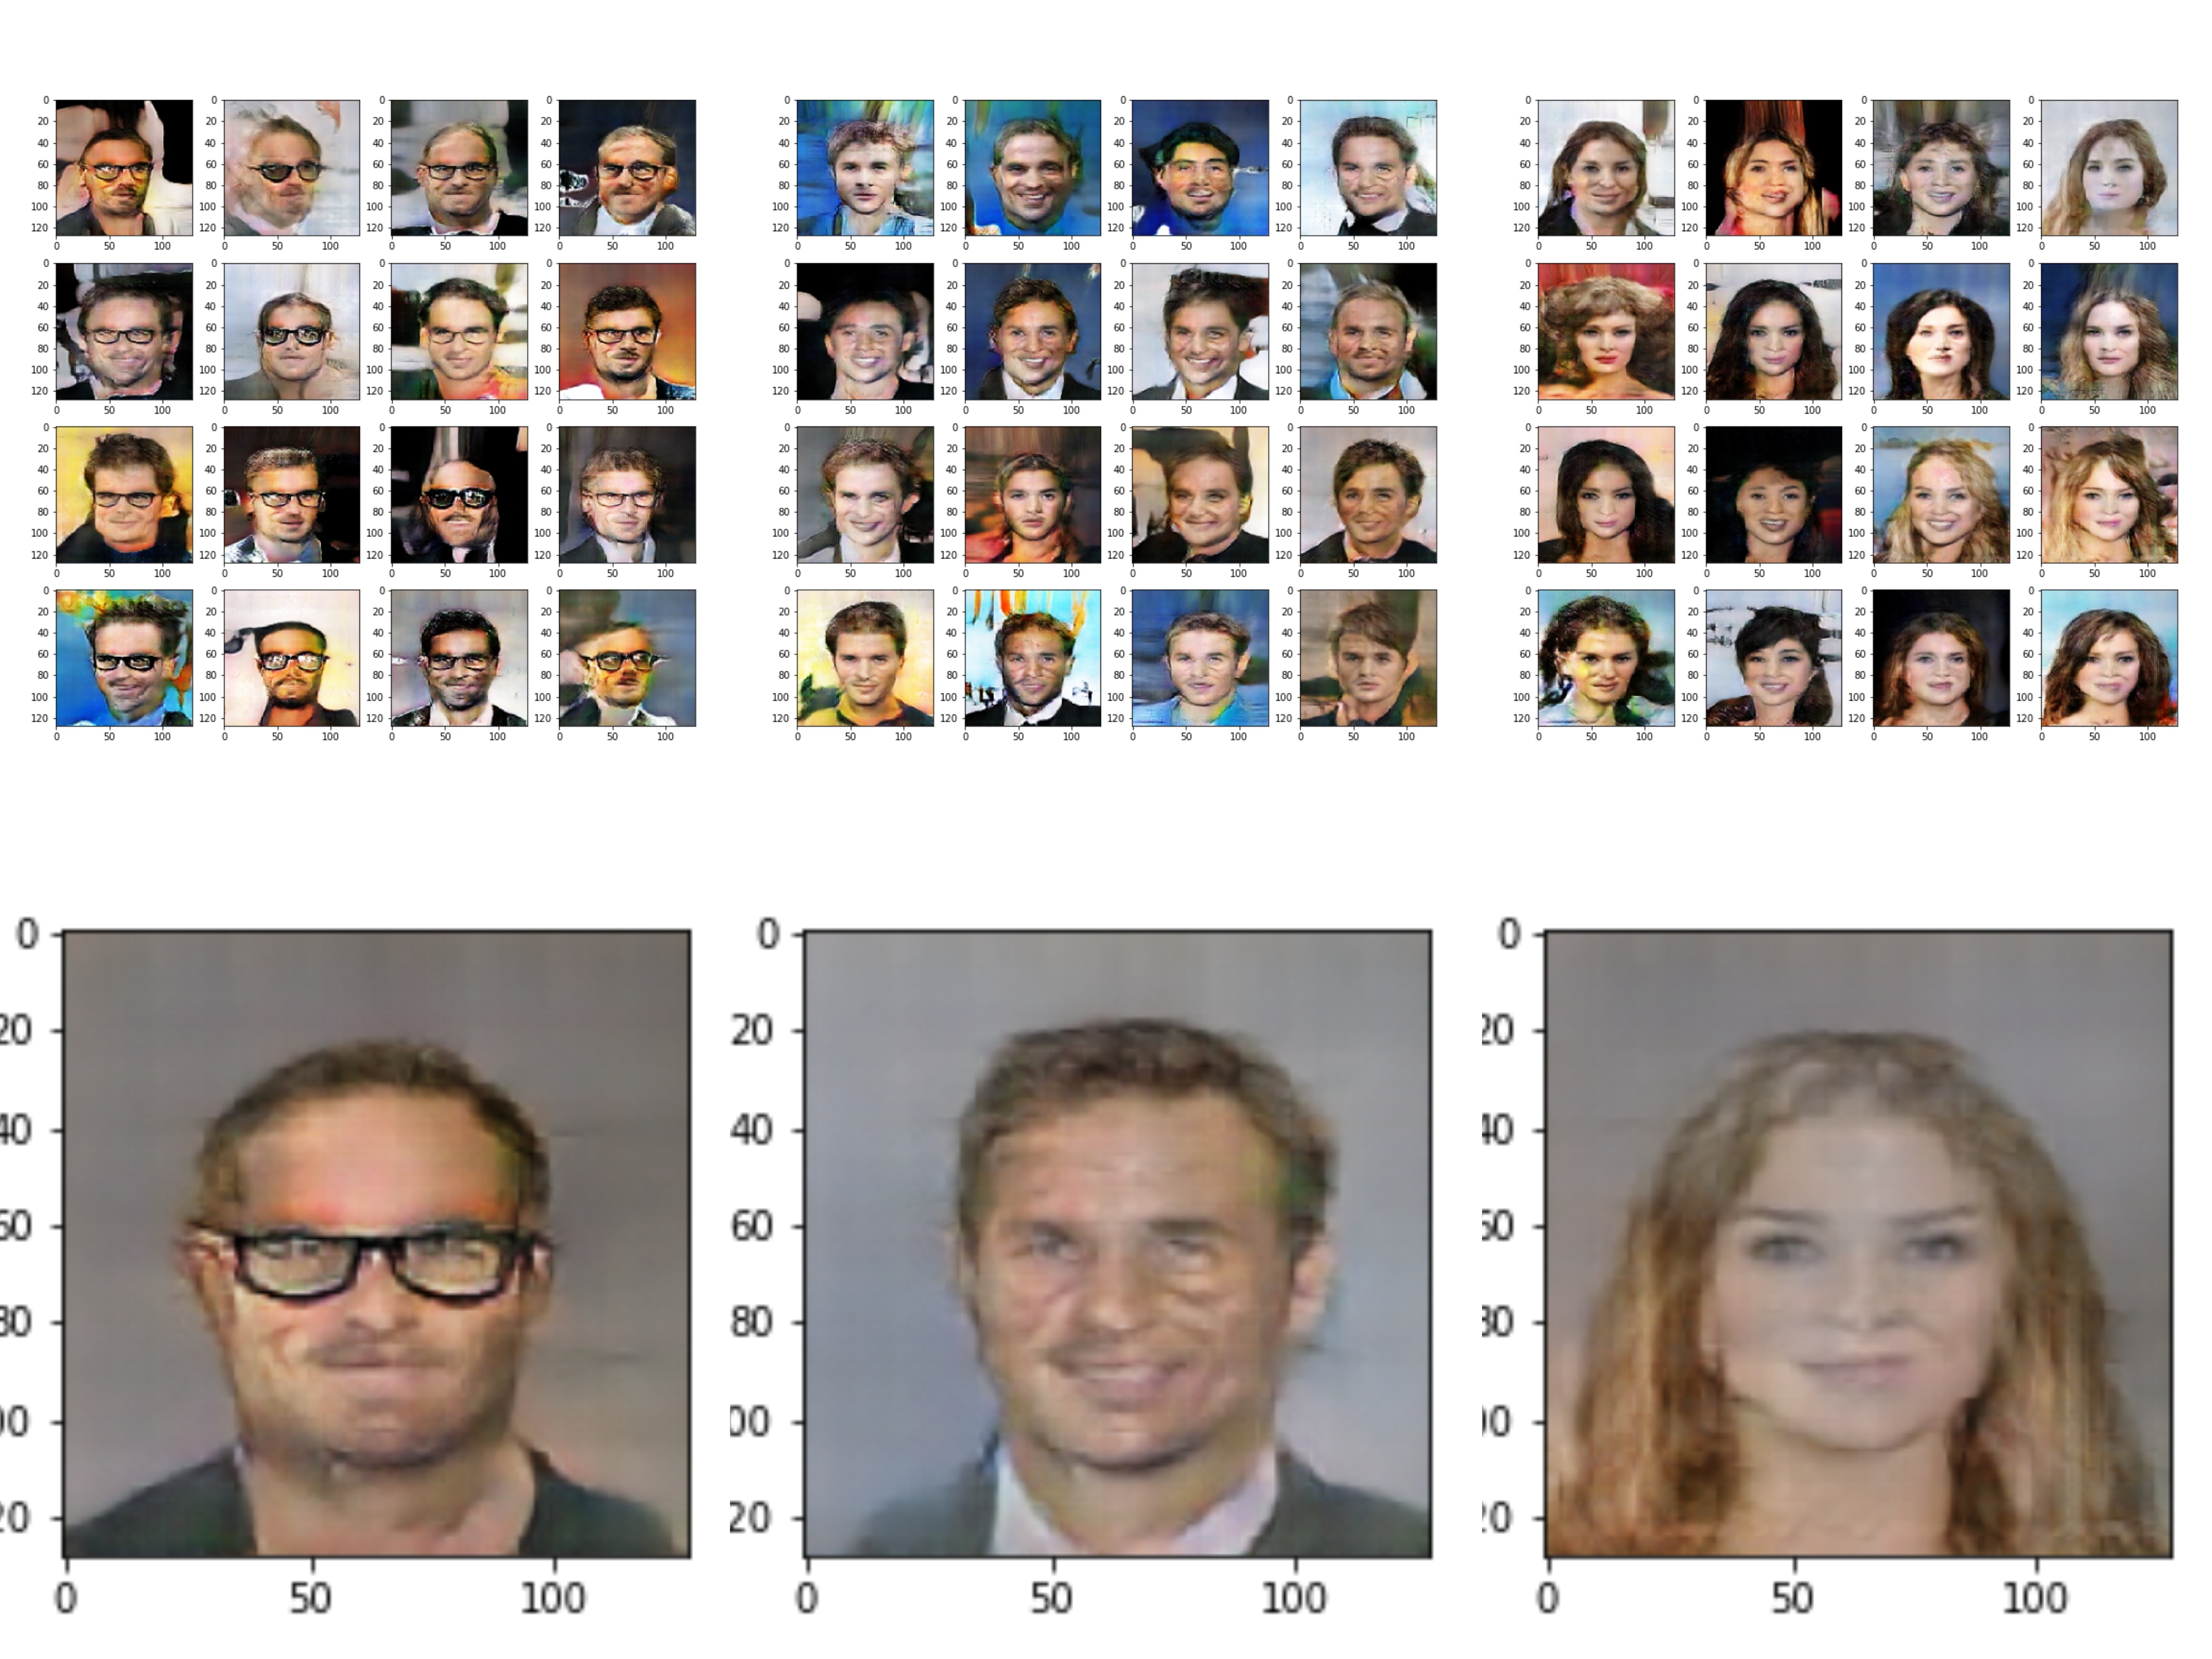 Average Of Faces